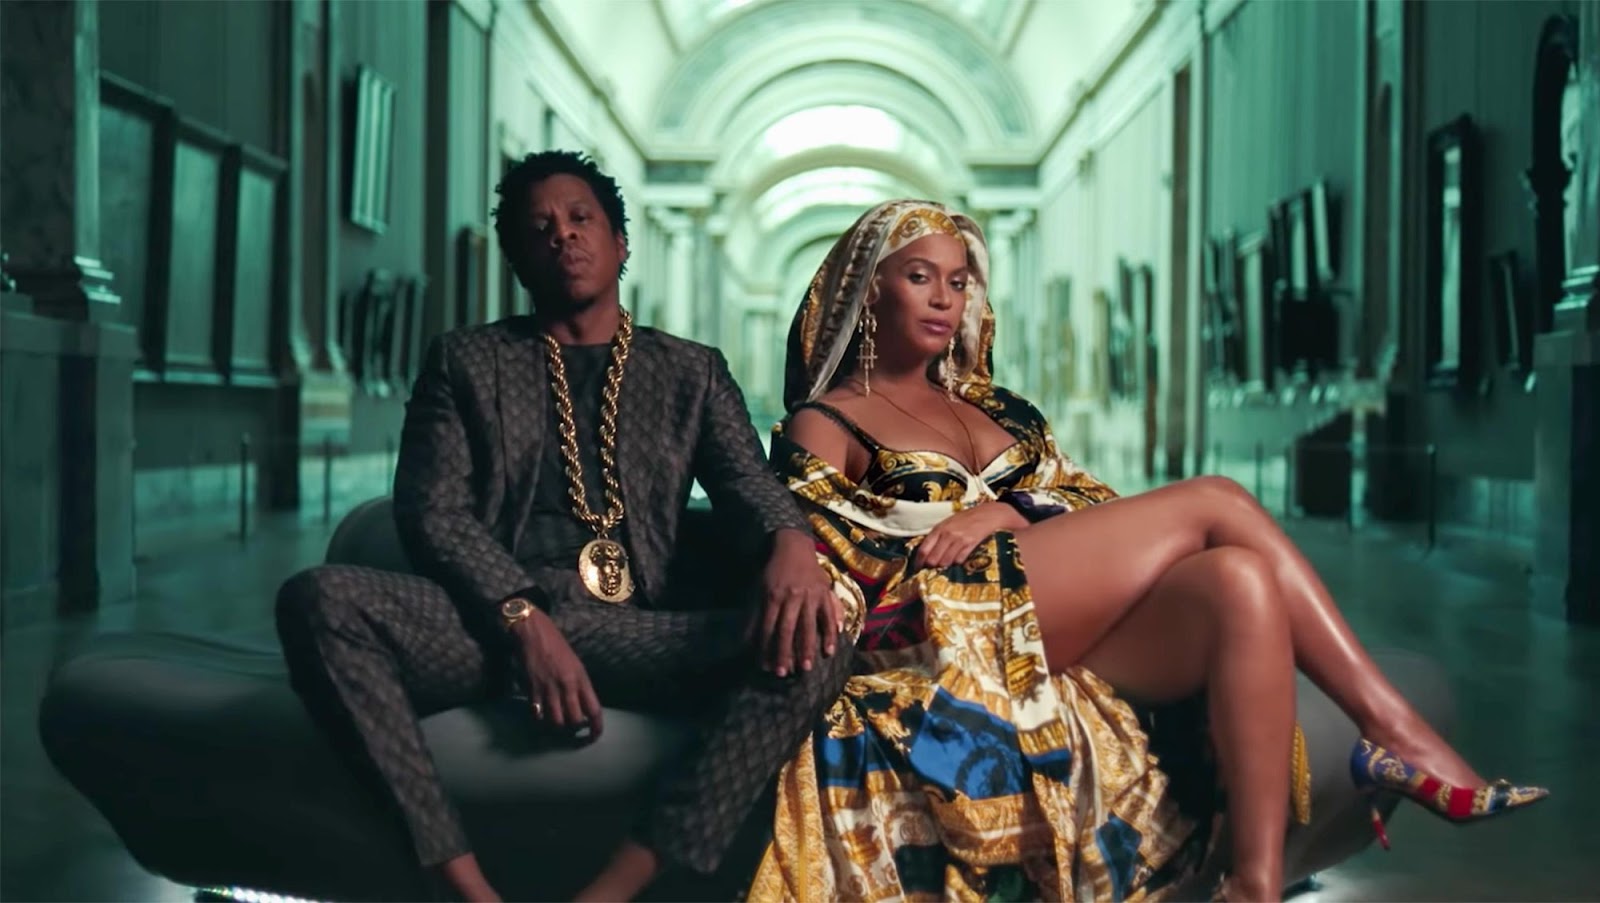 Video: The Carters (Beyoncé and Jay-Z) - 'Apeshit', Celebrity Bug...